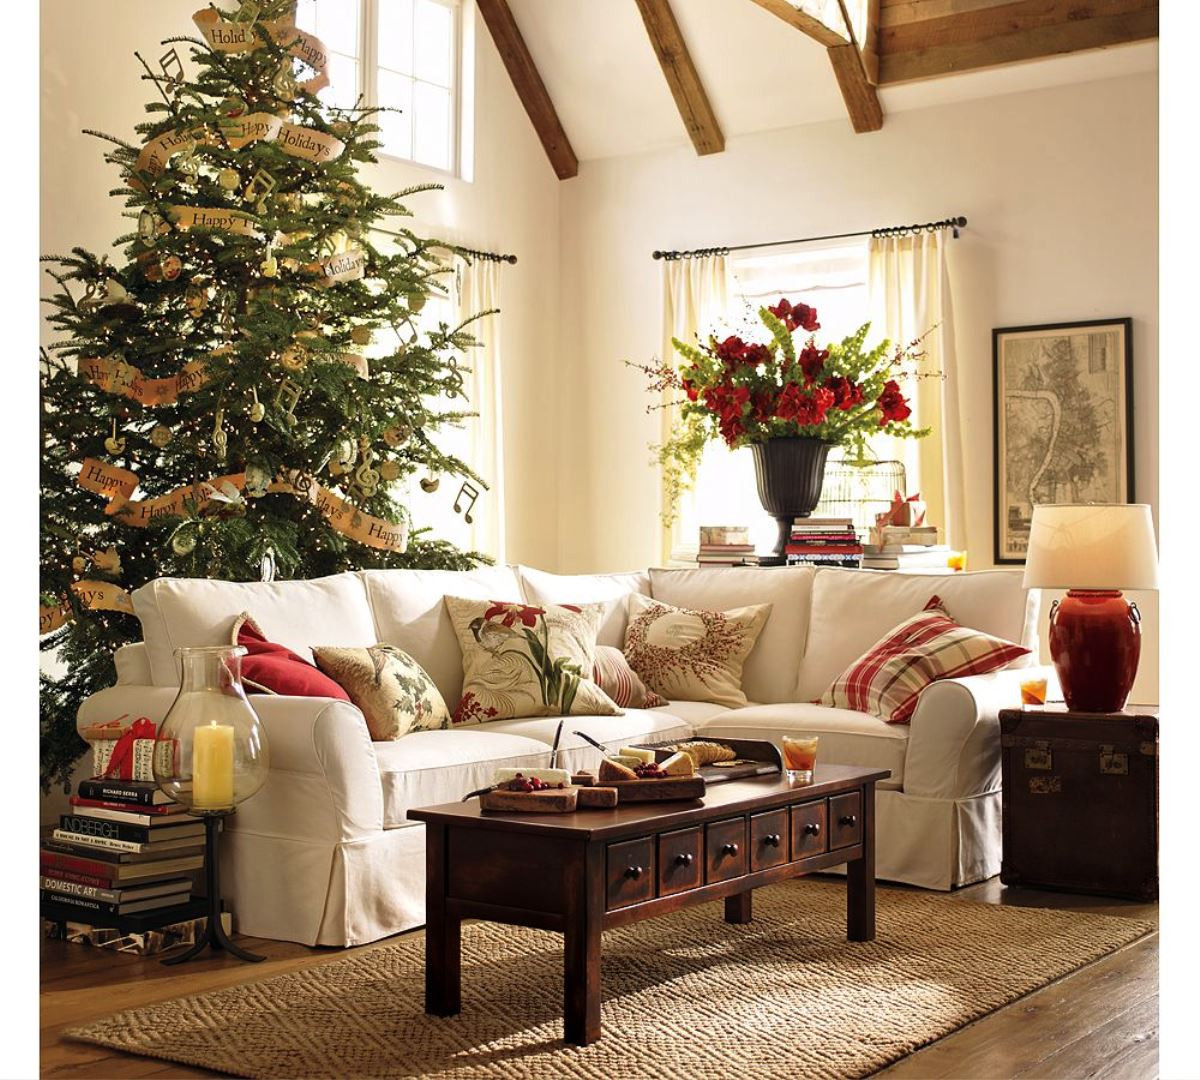 Living Room Decorated For Christmas
 50 Stunning Christmas Decorations For Your Living Room